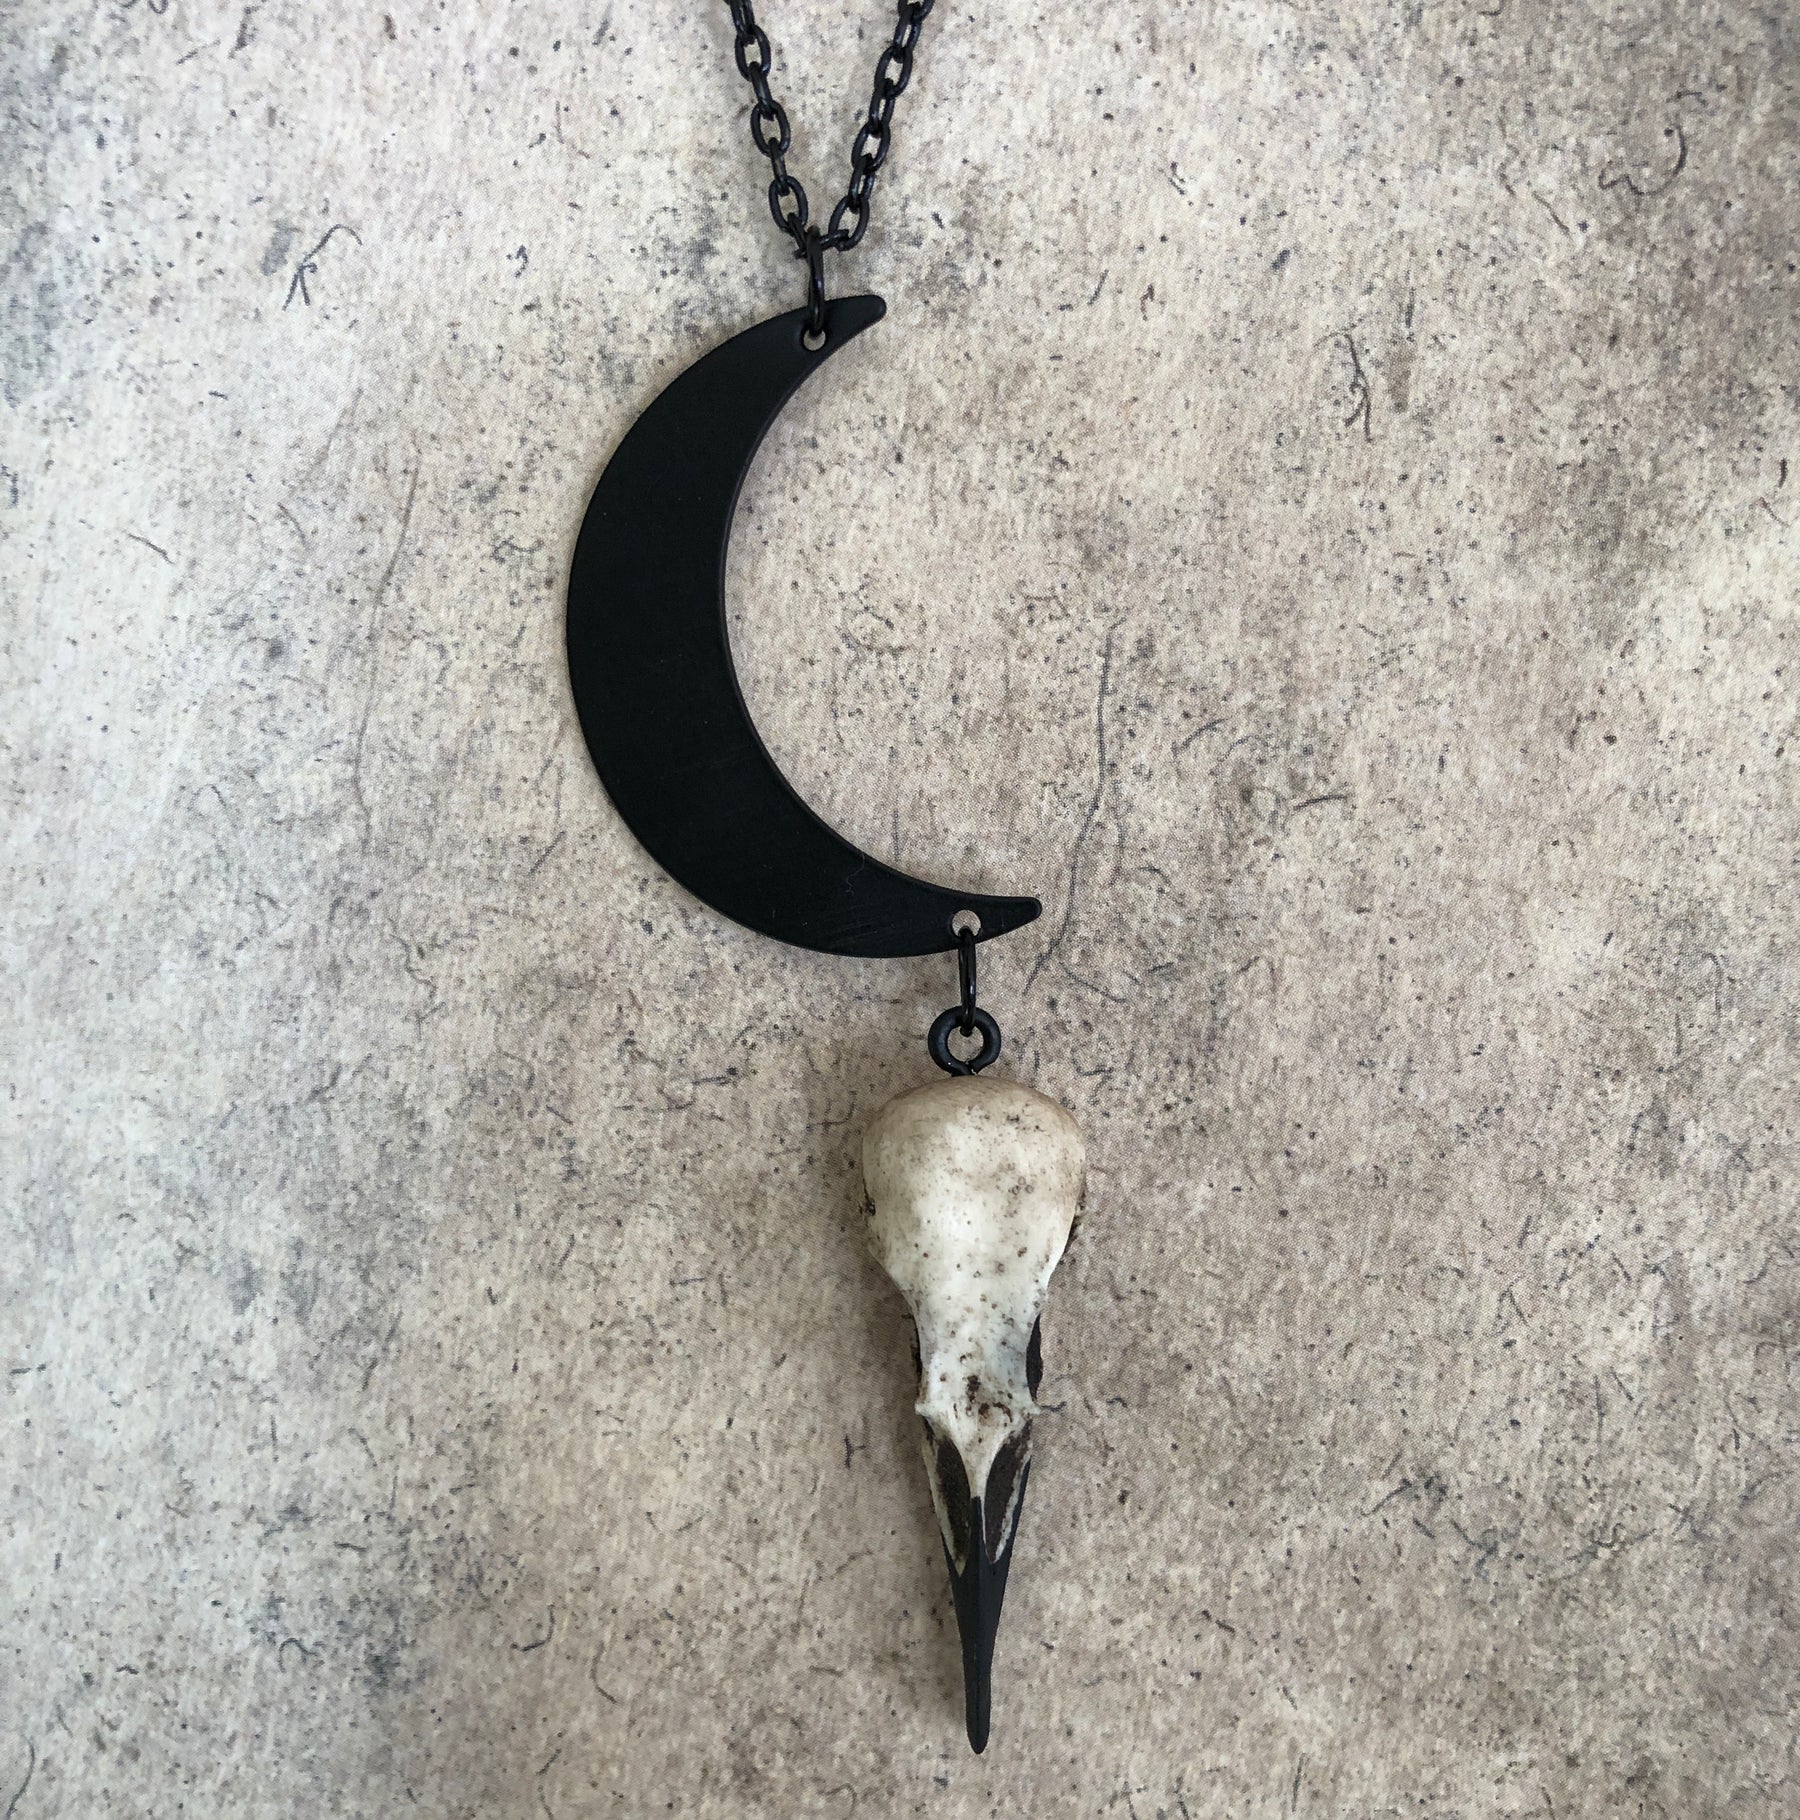 Close up of Crescent moon charm pendant and bone jewelry mini resin raven skull dangle pendant with a black chain.